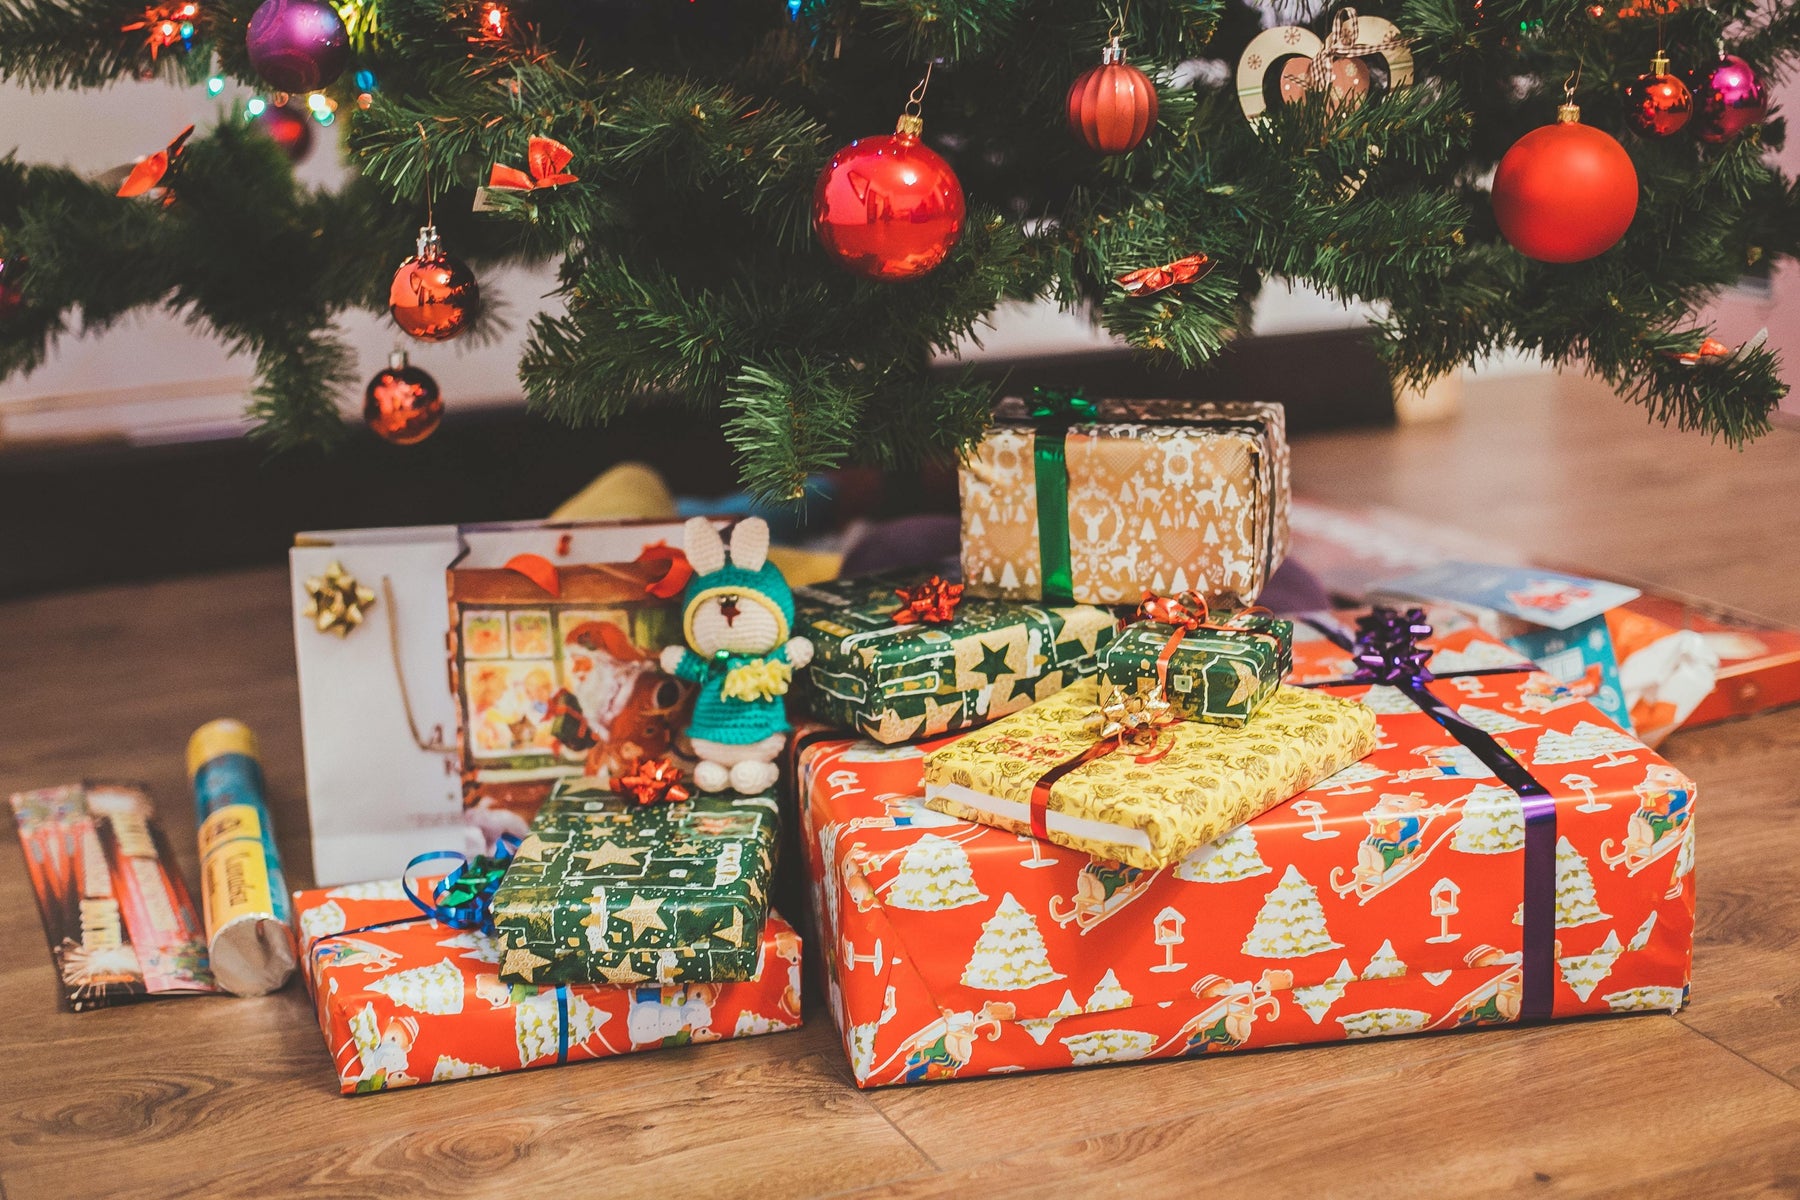 Christmas 2020: Quality Gifts for Family & Loved Ones